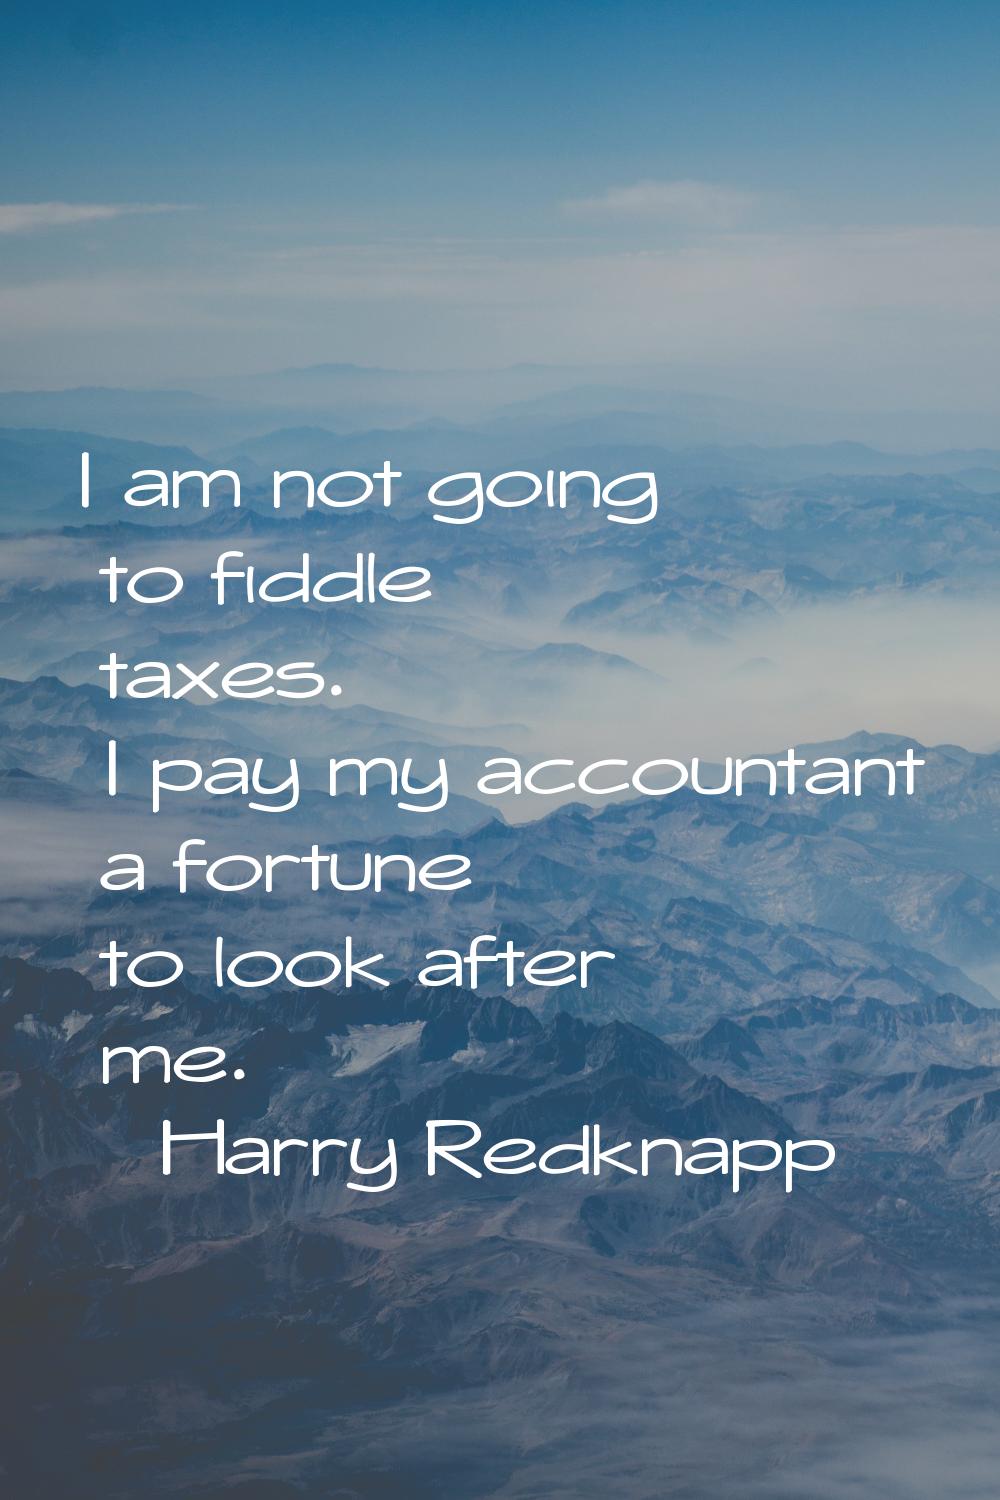 I am not going to fiddle taxes. I pay my accountant a fortune to look after me.